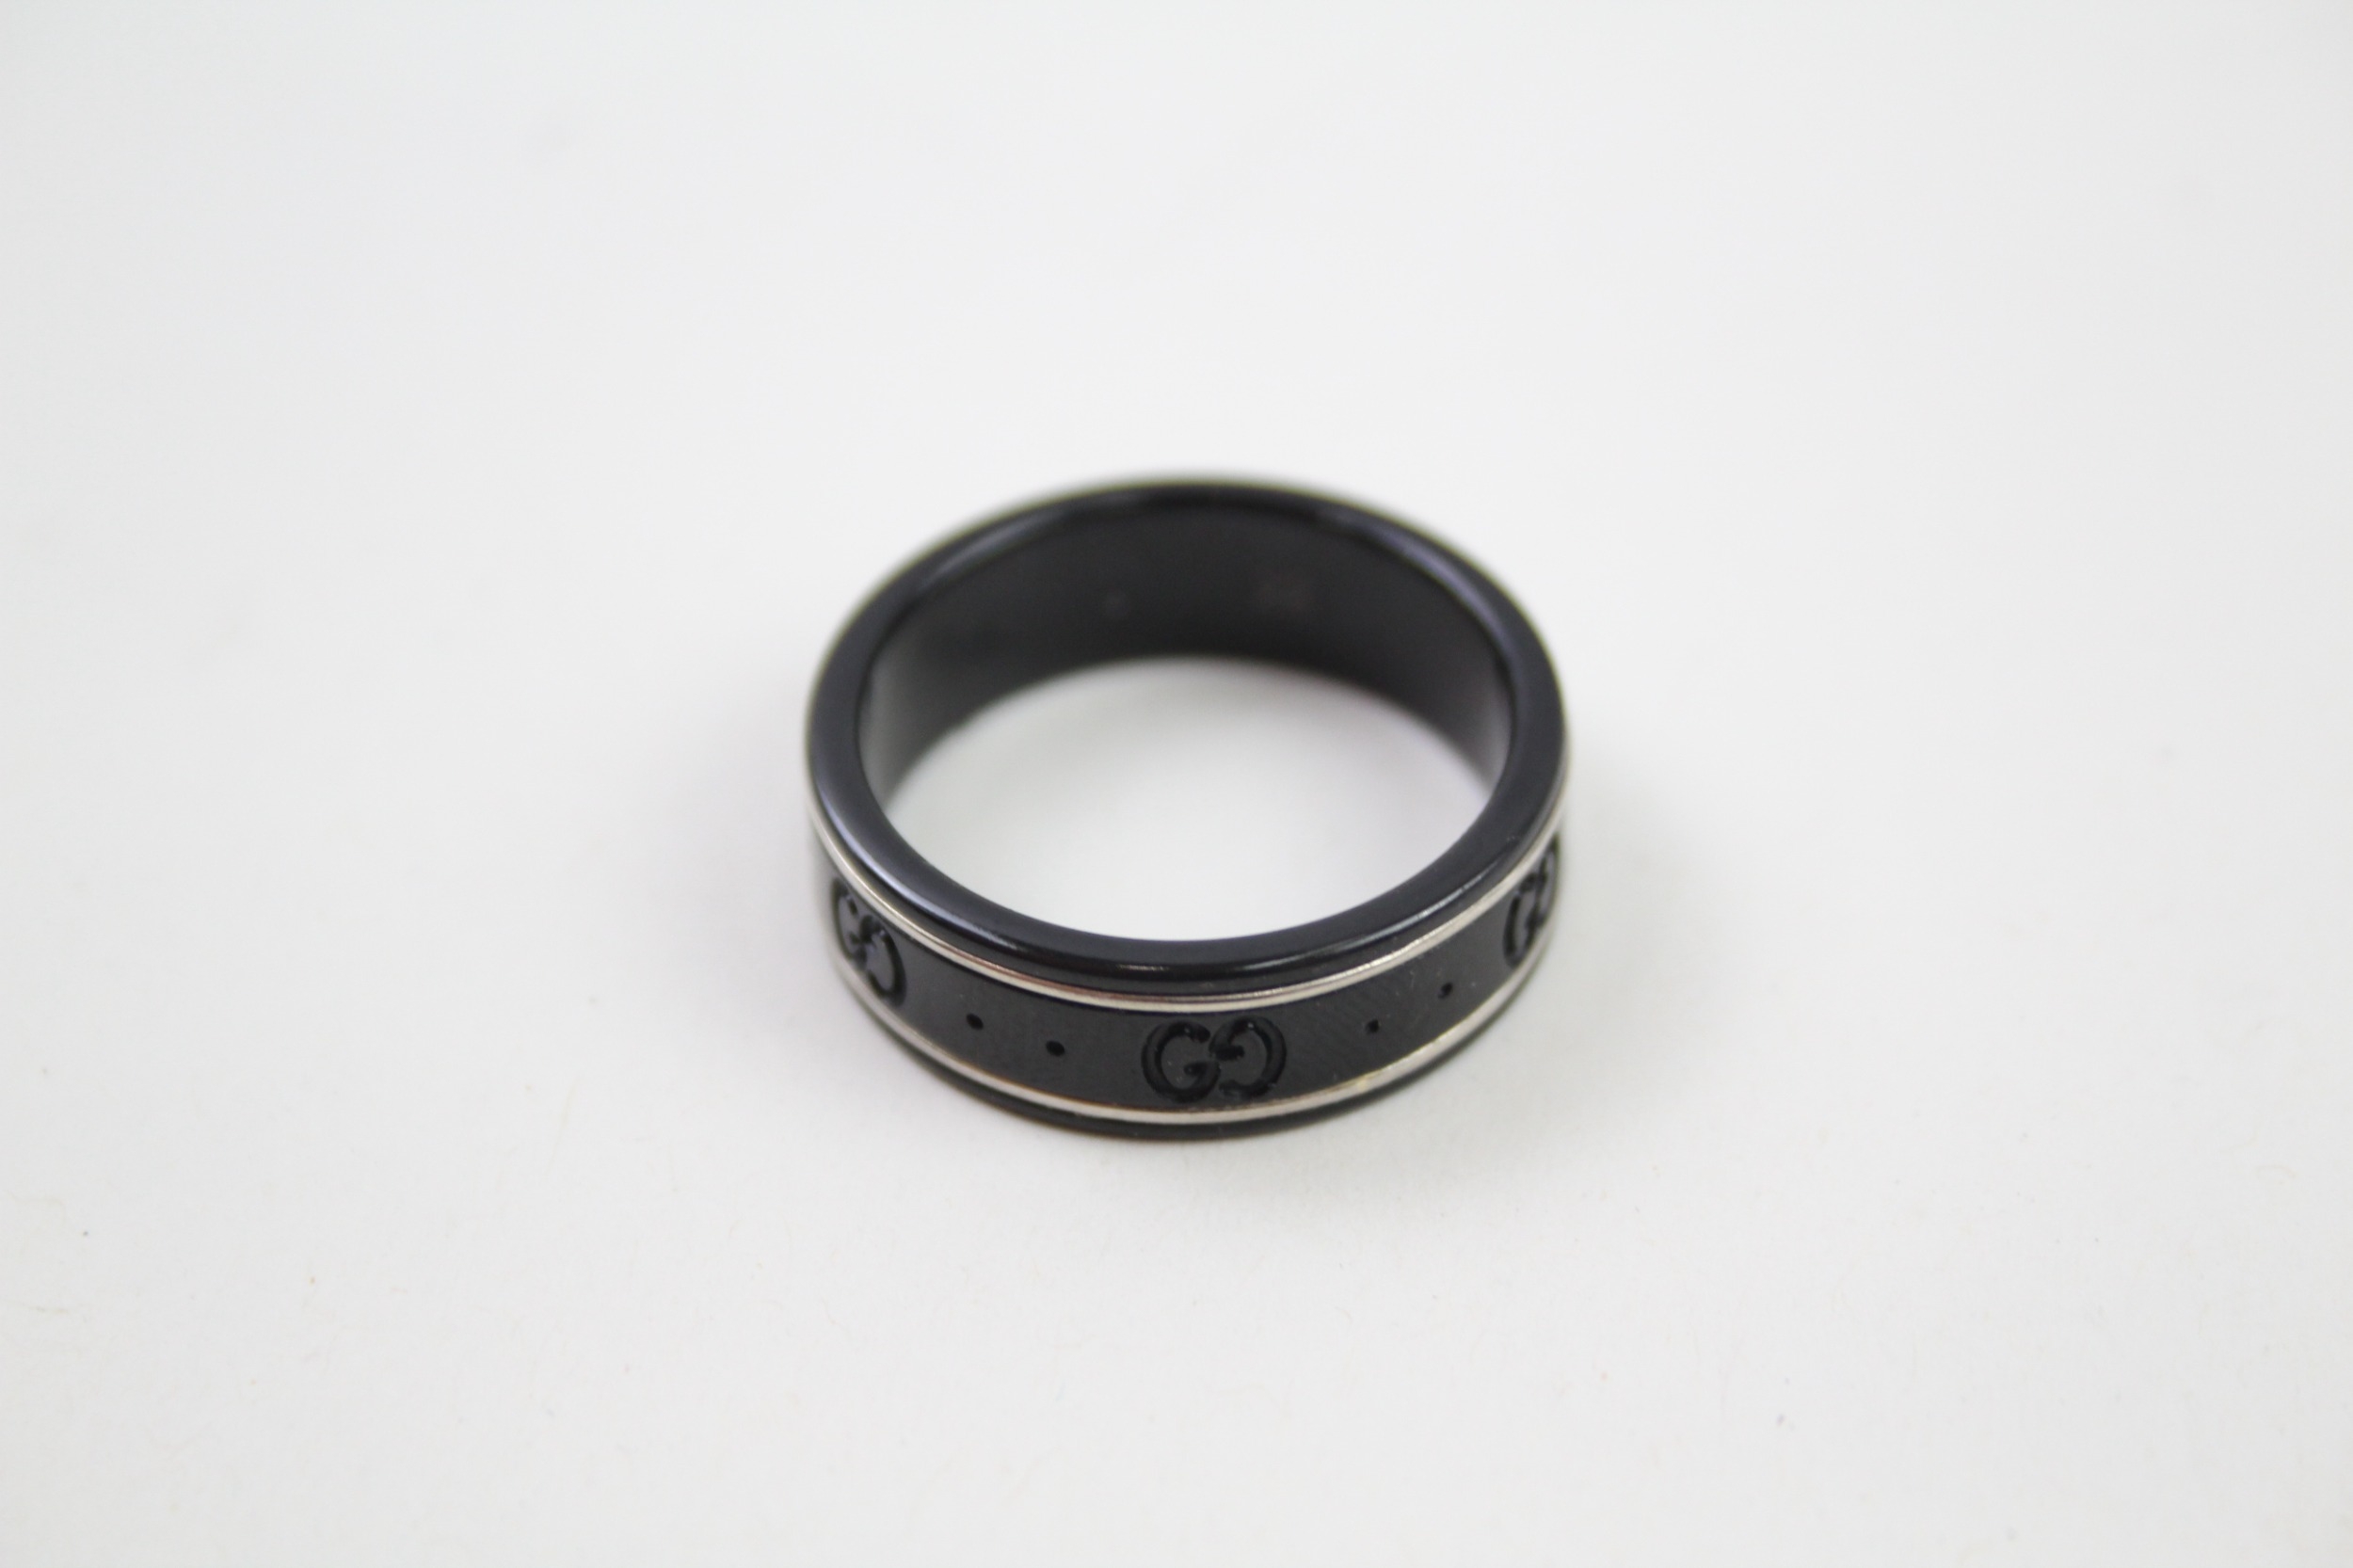 Black band ring by designer Gucci with box (3g) - Image 5 of 8